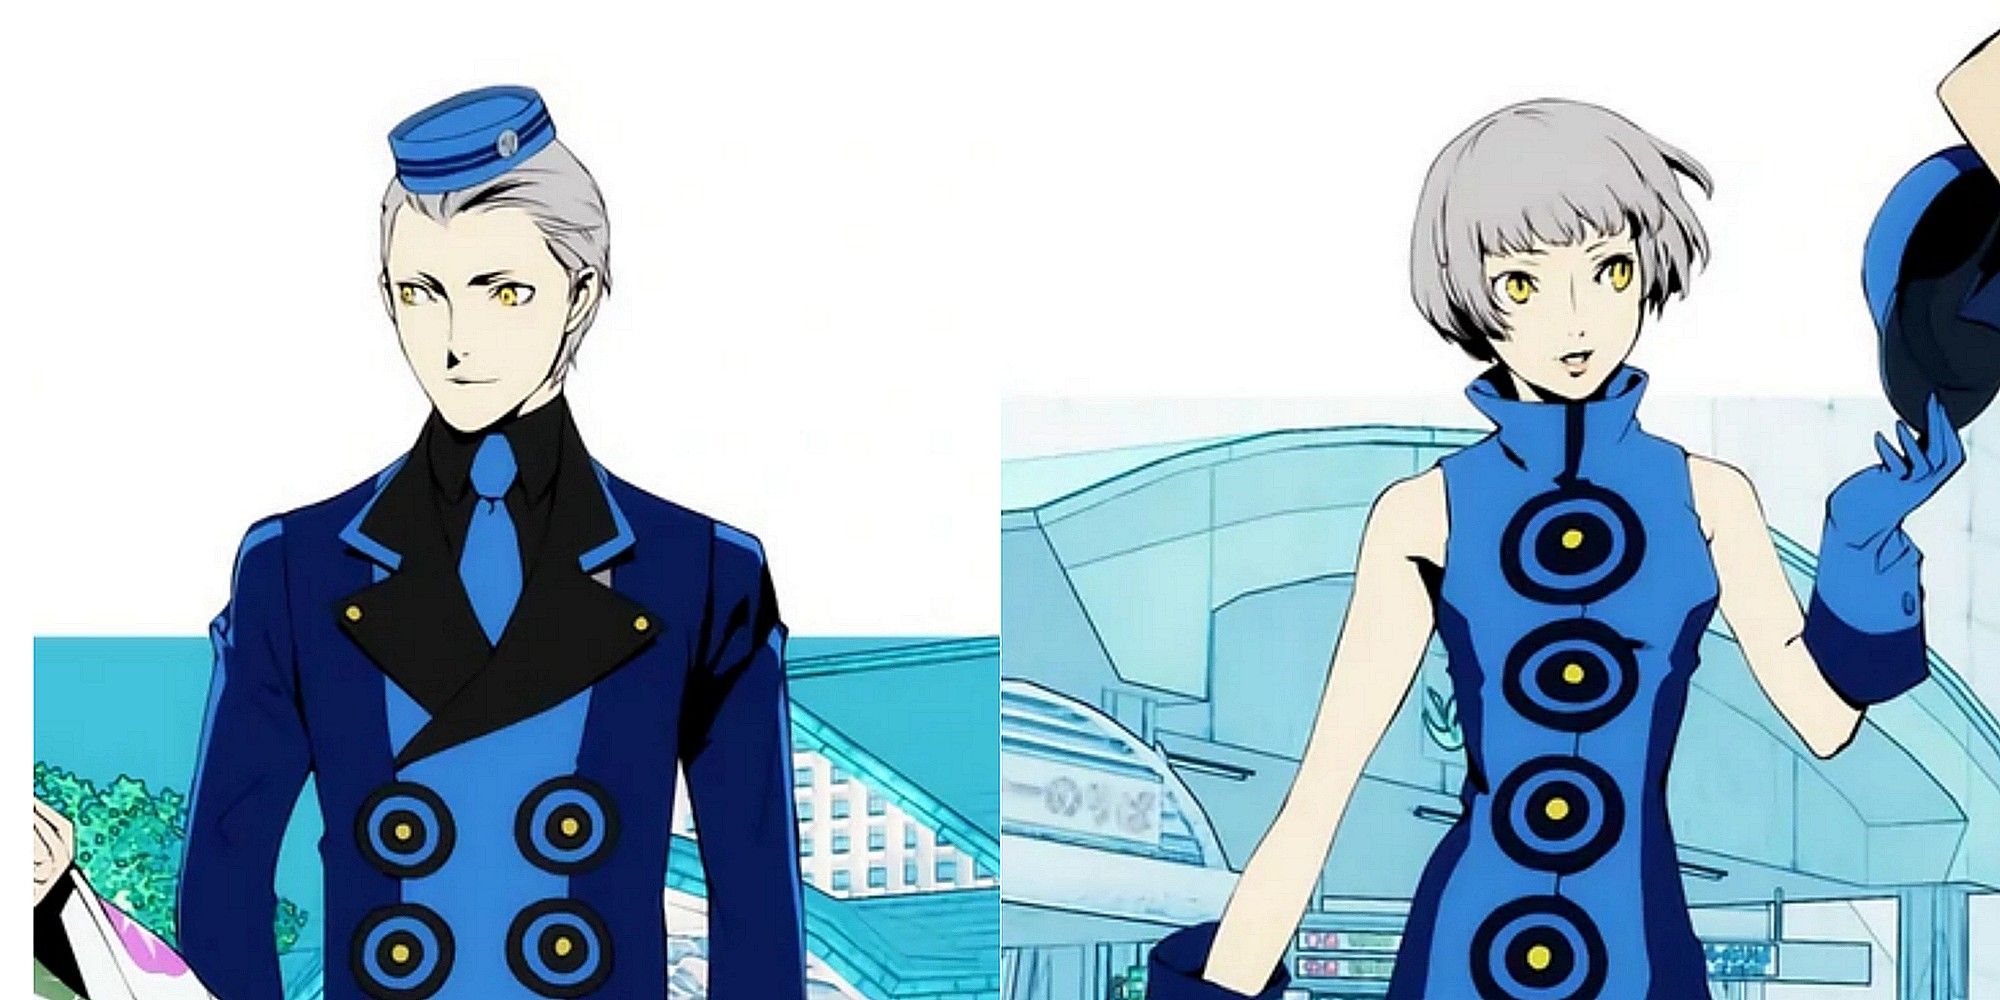 theodore and elizabther from the dvd covers for persona 3 portable